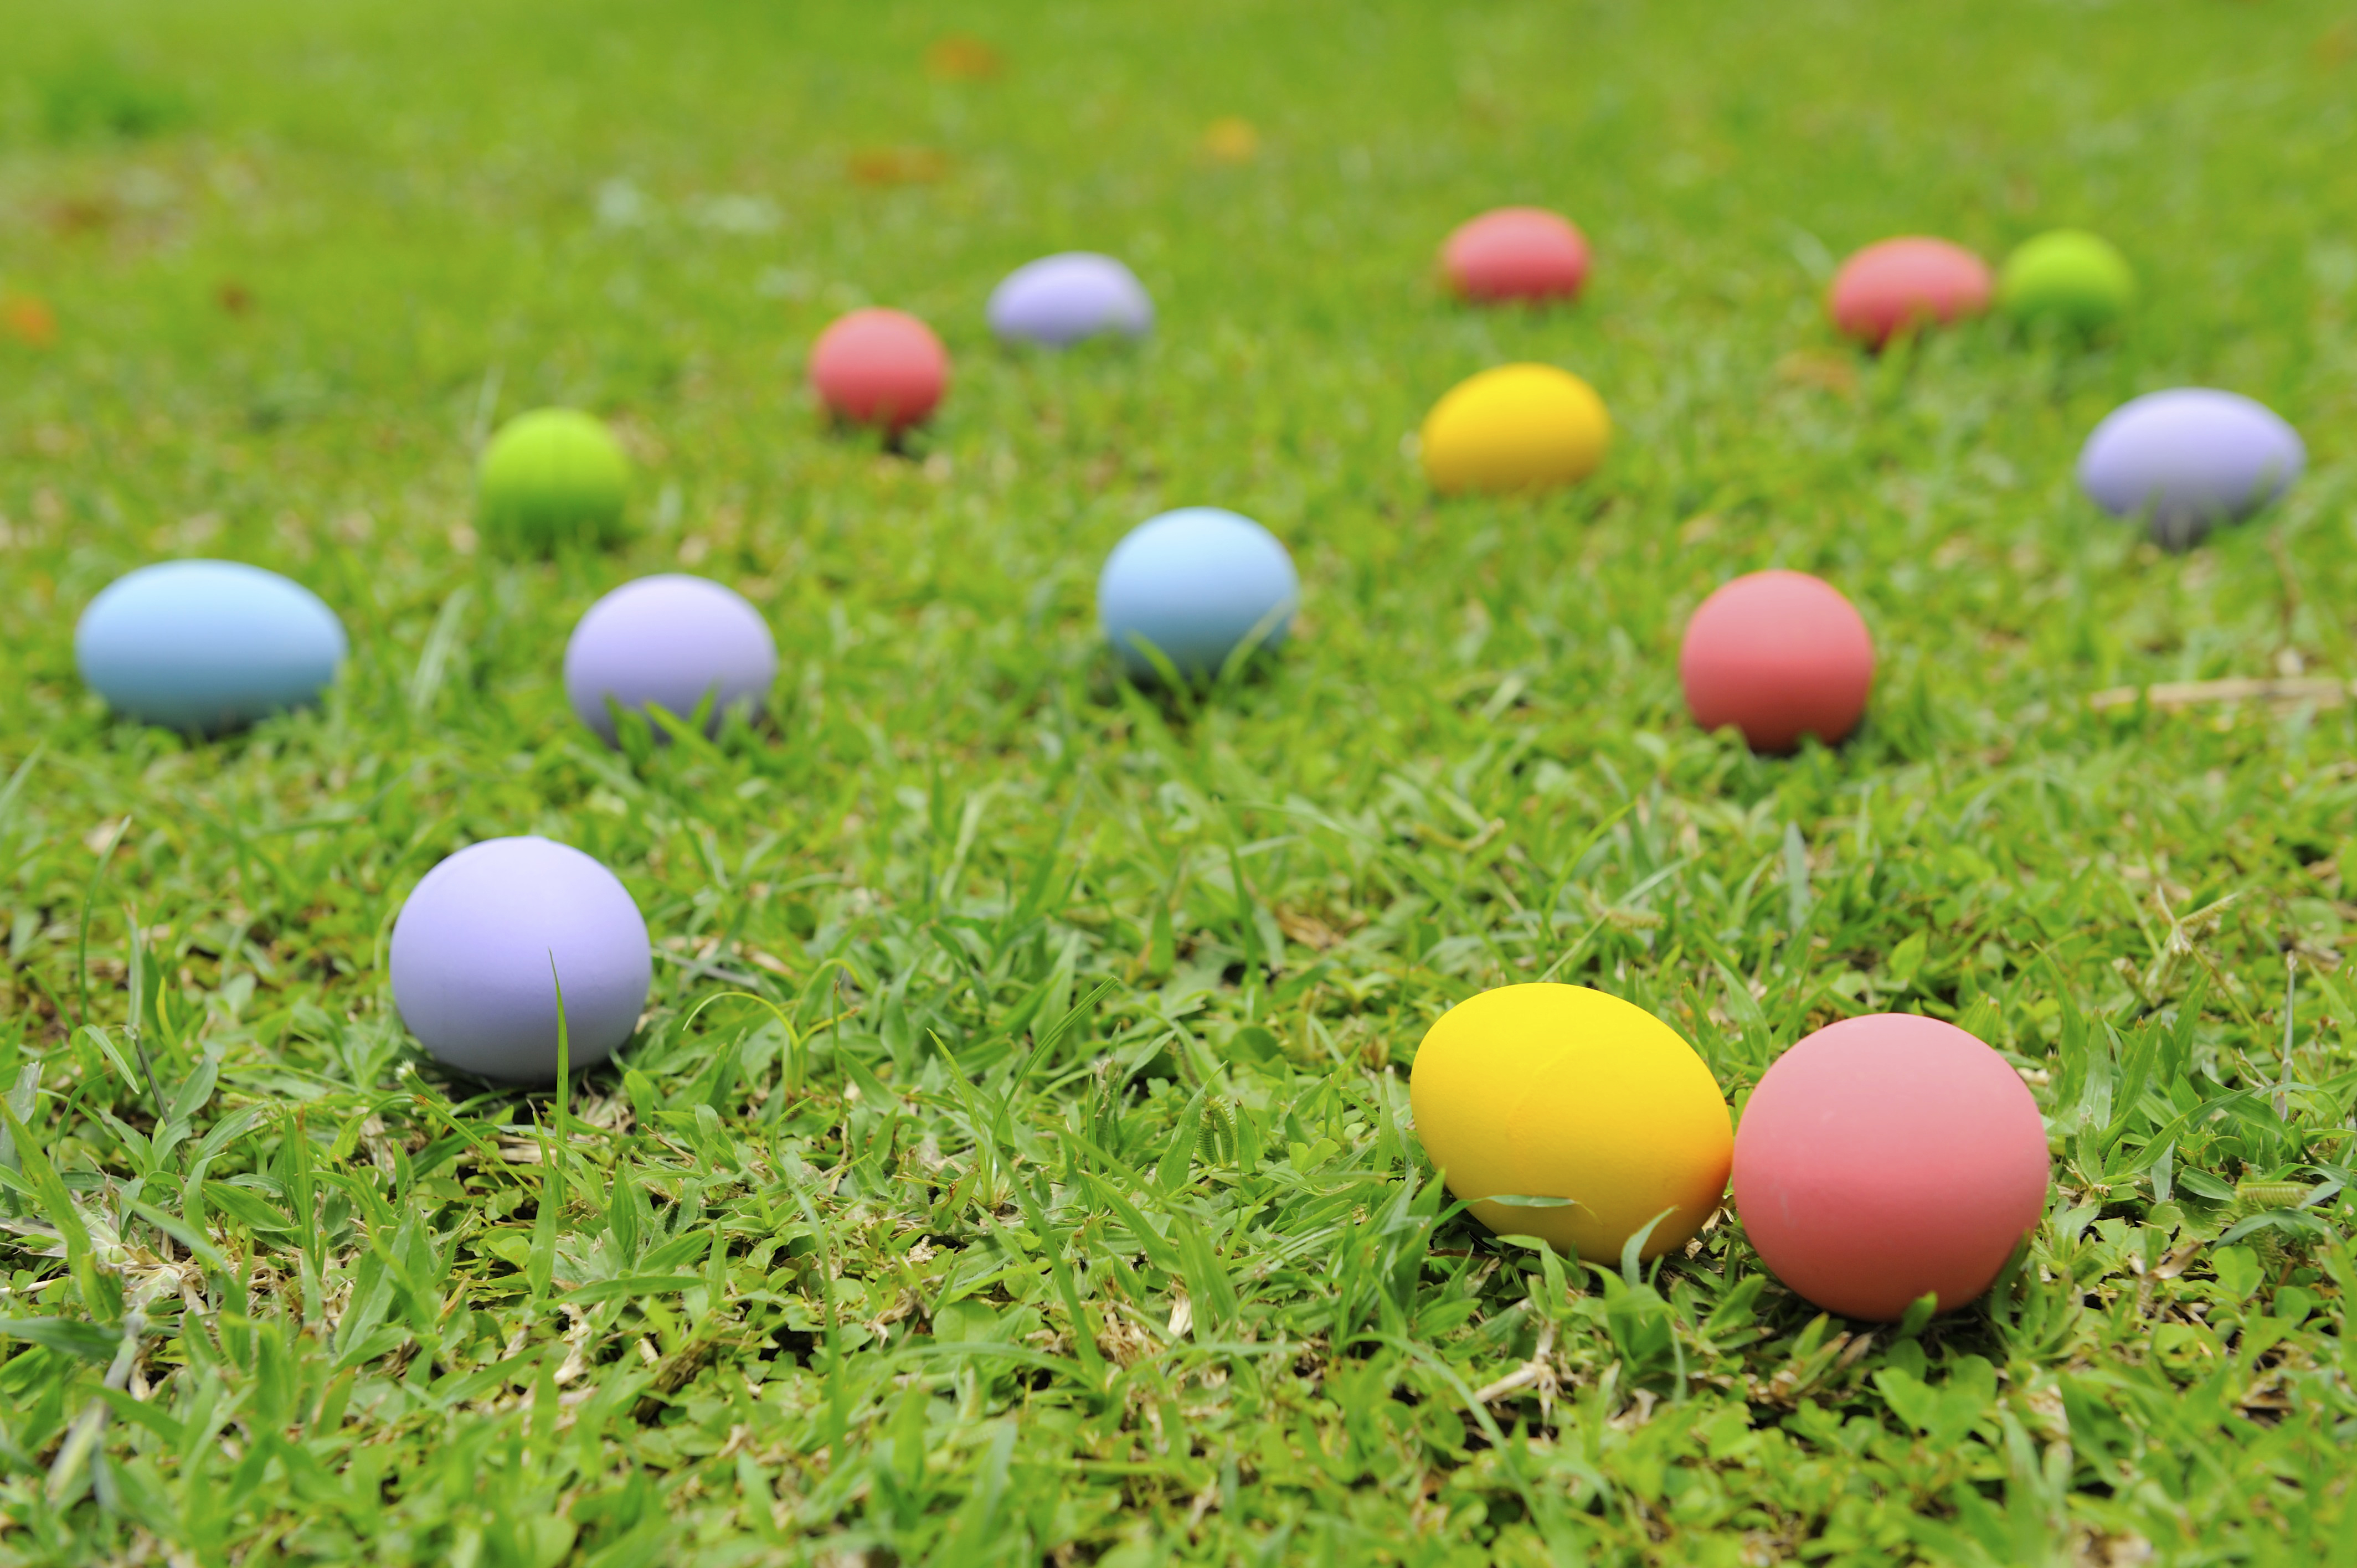 Colorful Easter eggs on spread out on a grass lawn